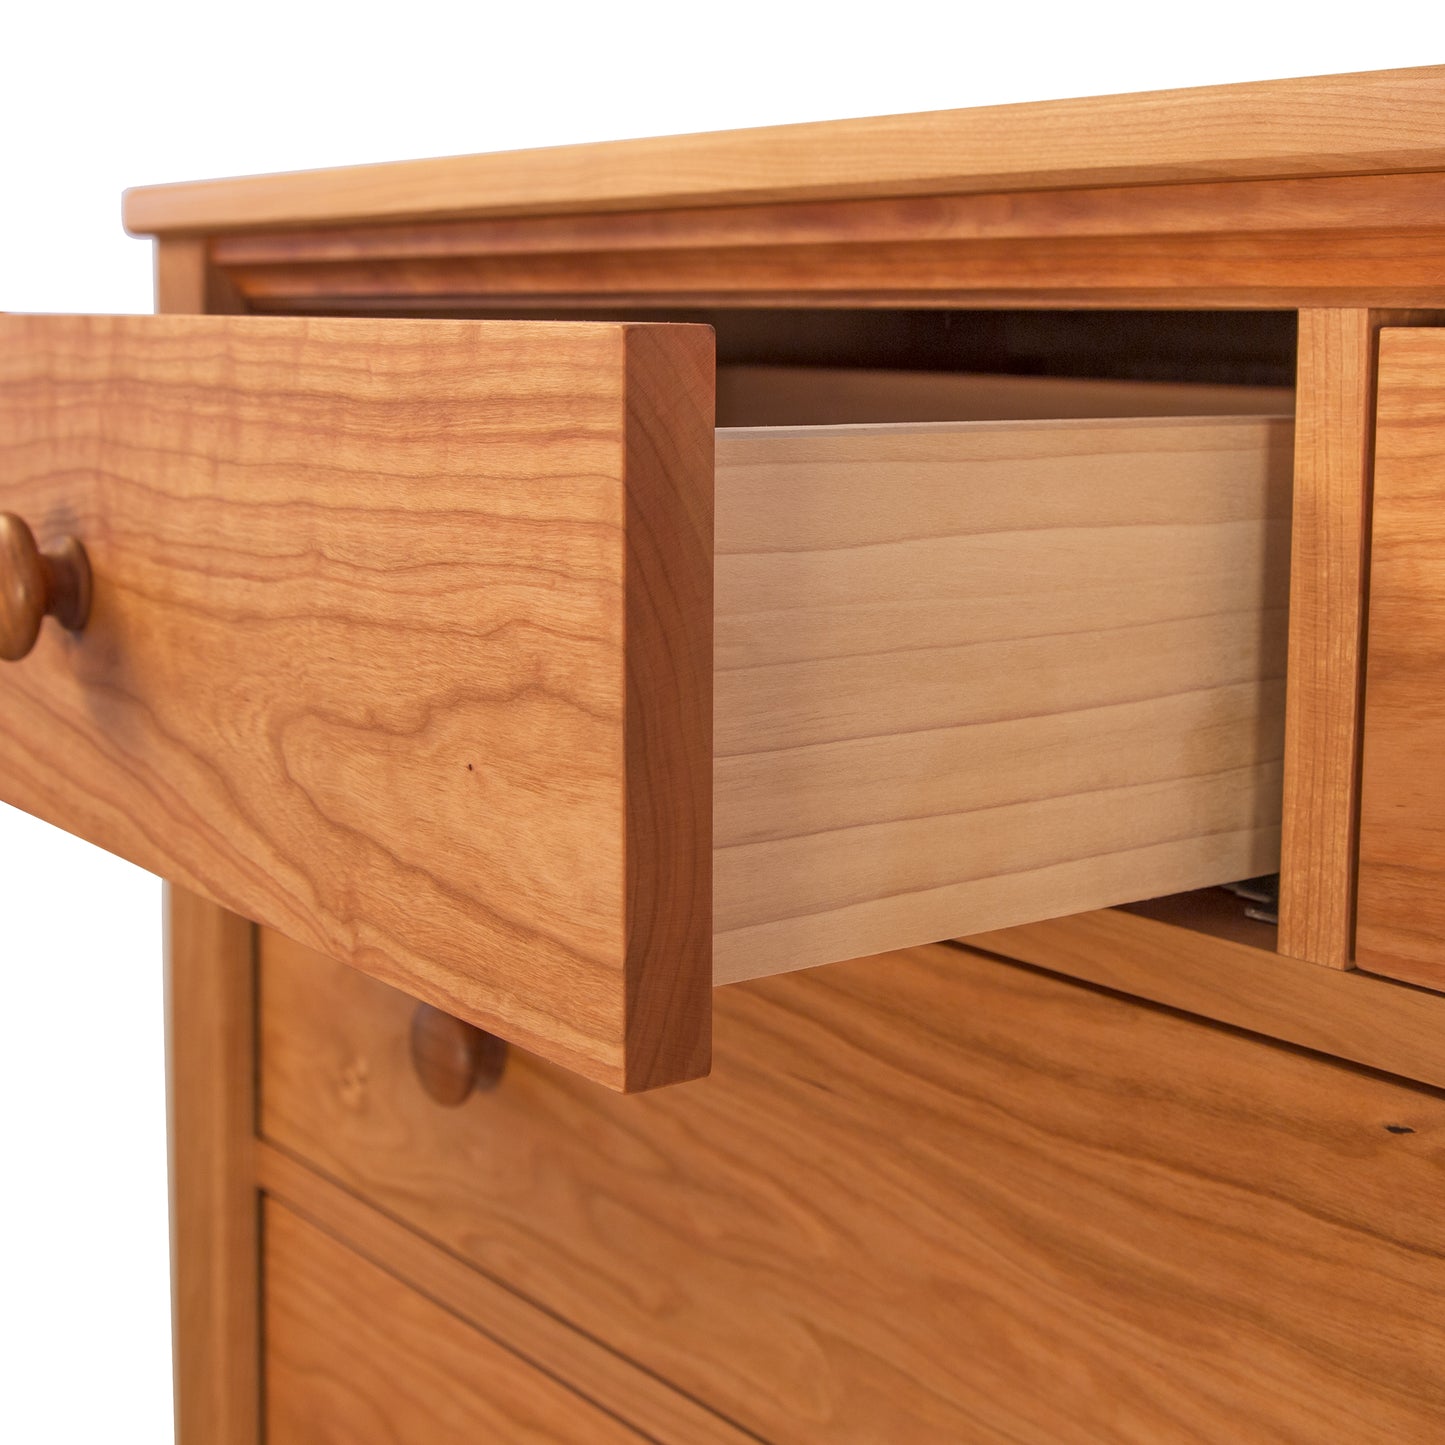 A beautifully crafted Maple Corner Woodworks Vermont Shaker Extra Wide Chest, made of natural hardwood, serving as an exquisite addition to any bedroom.